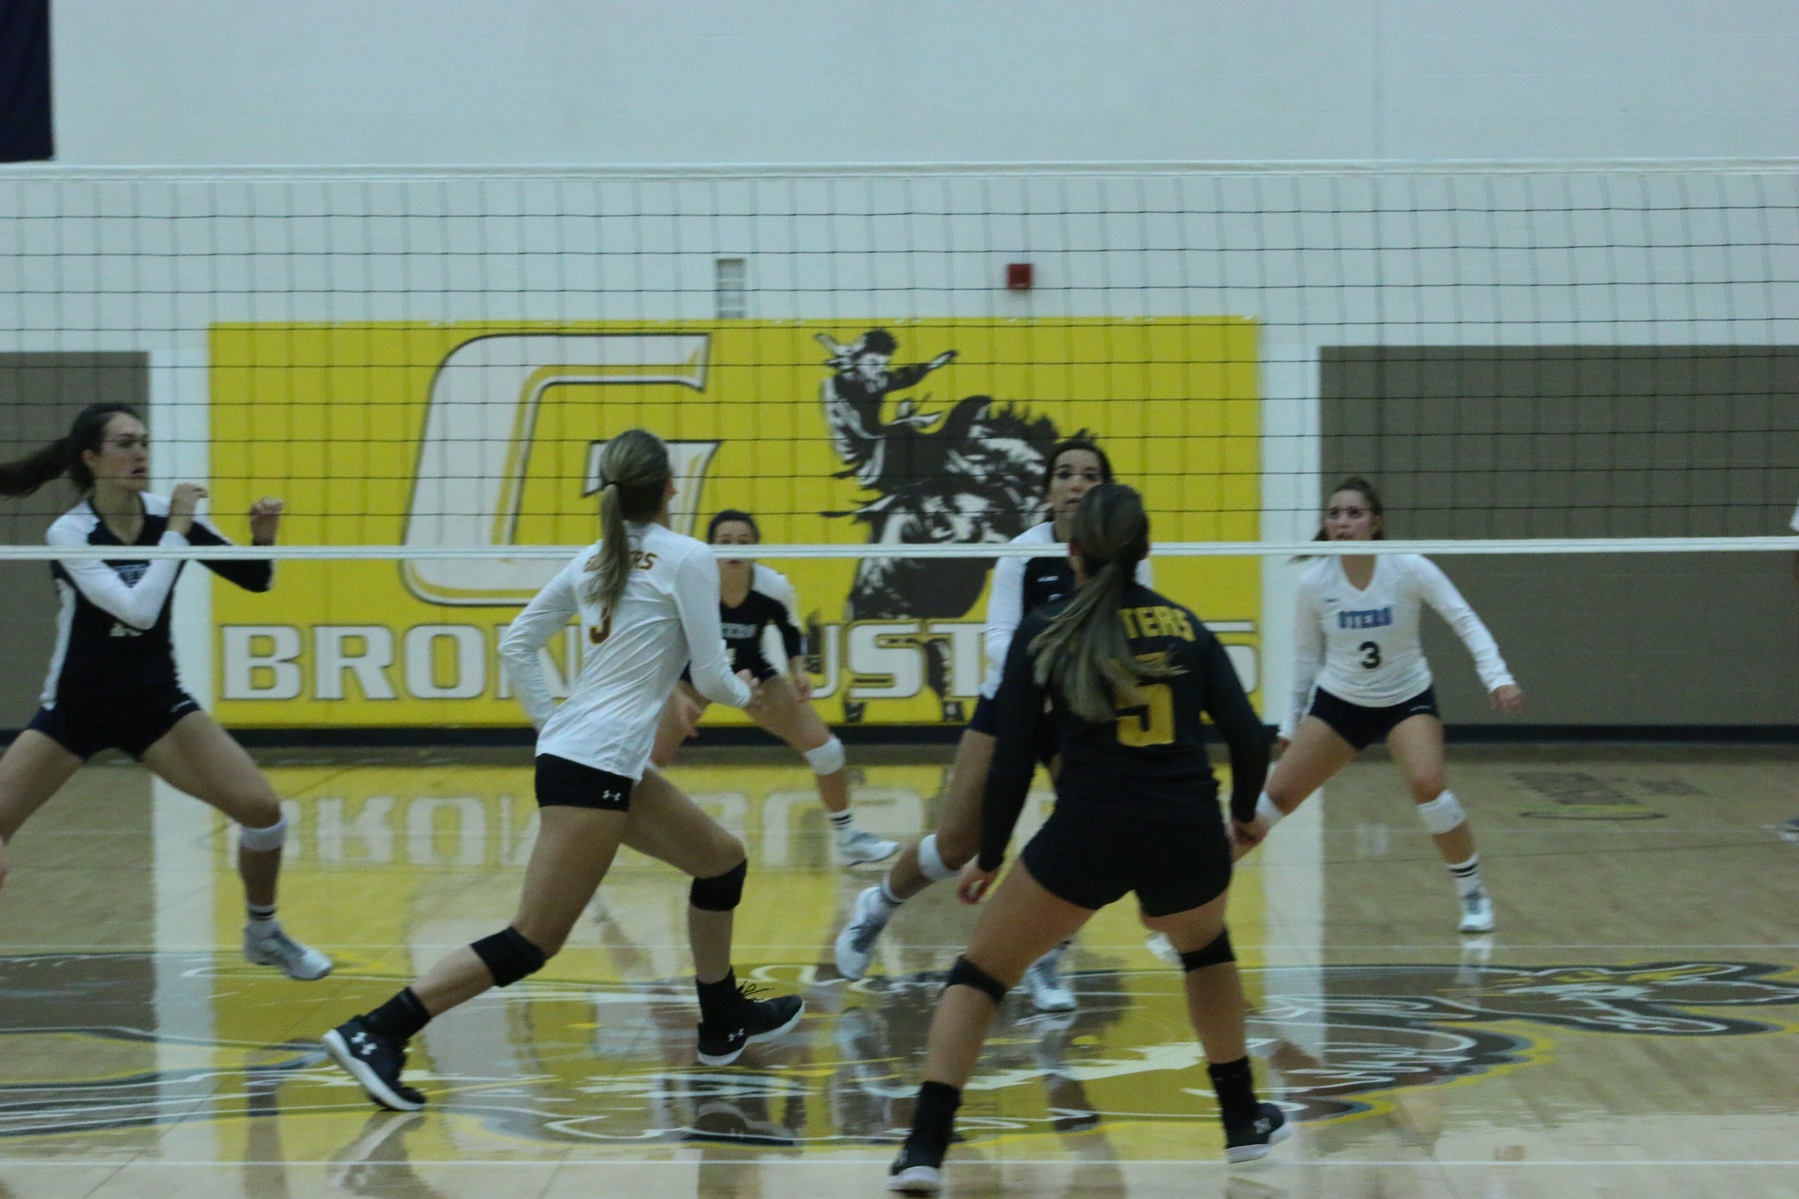 Broncbusters show promise in four-set loss to South Mountain